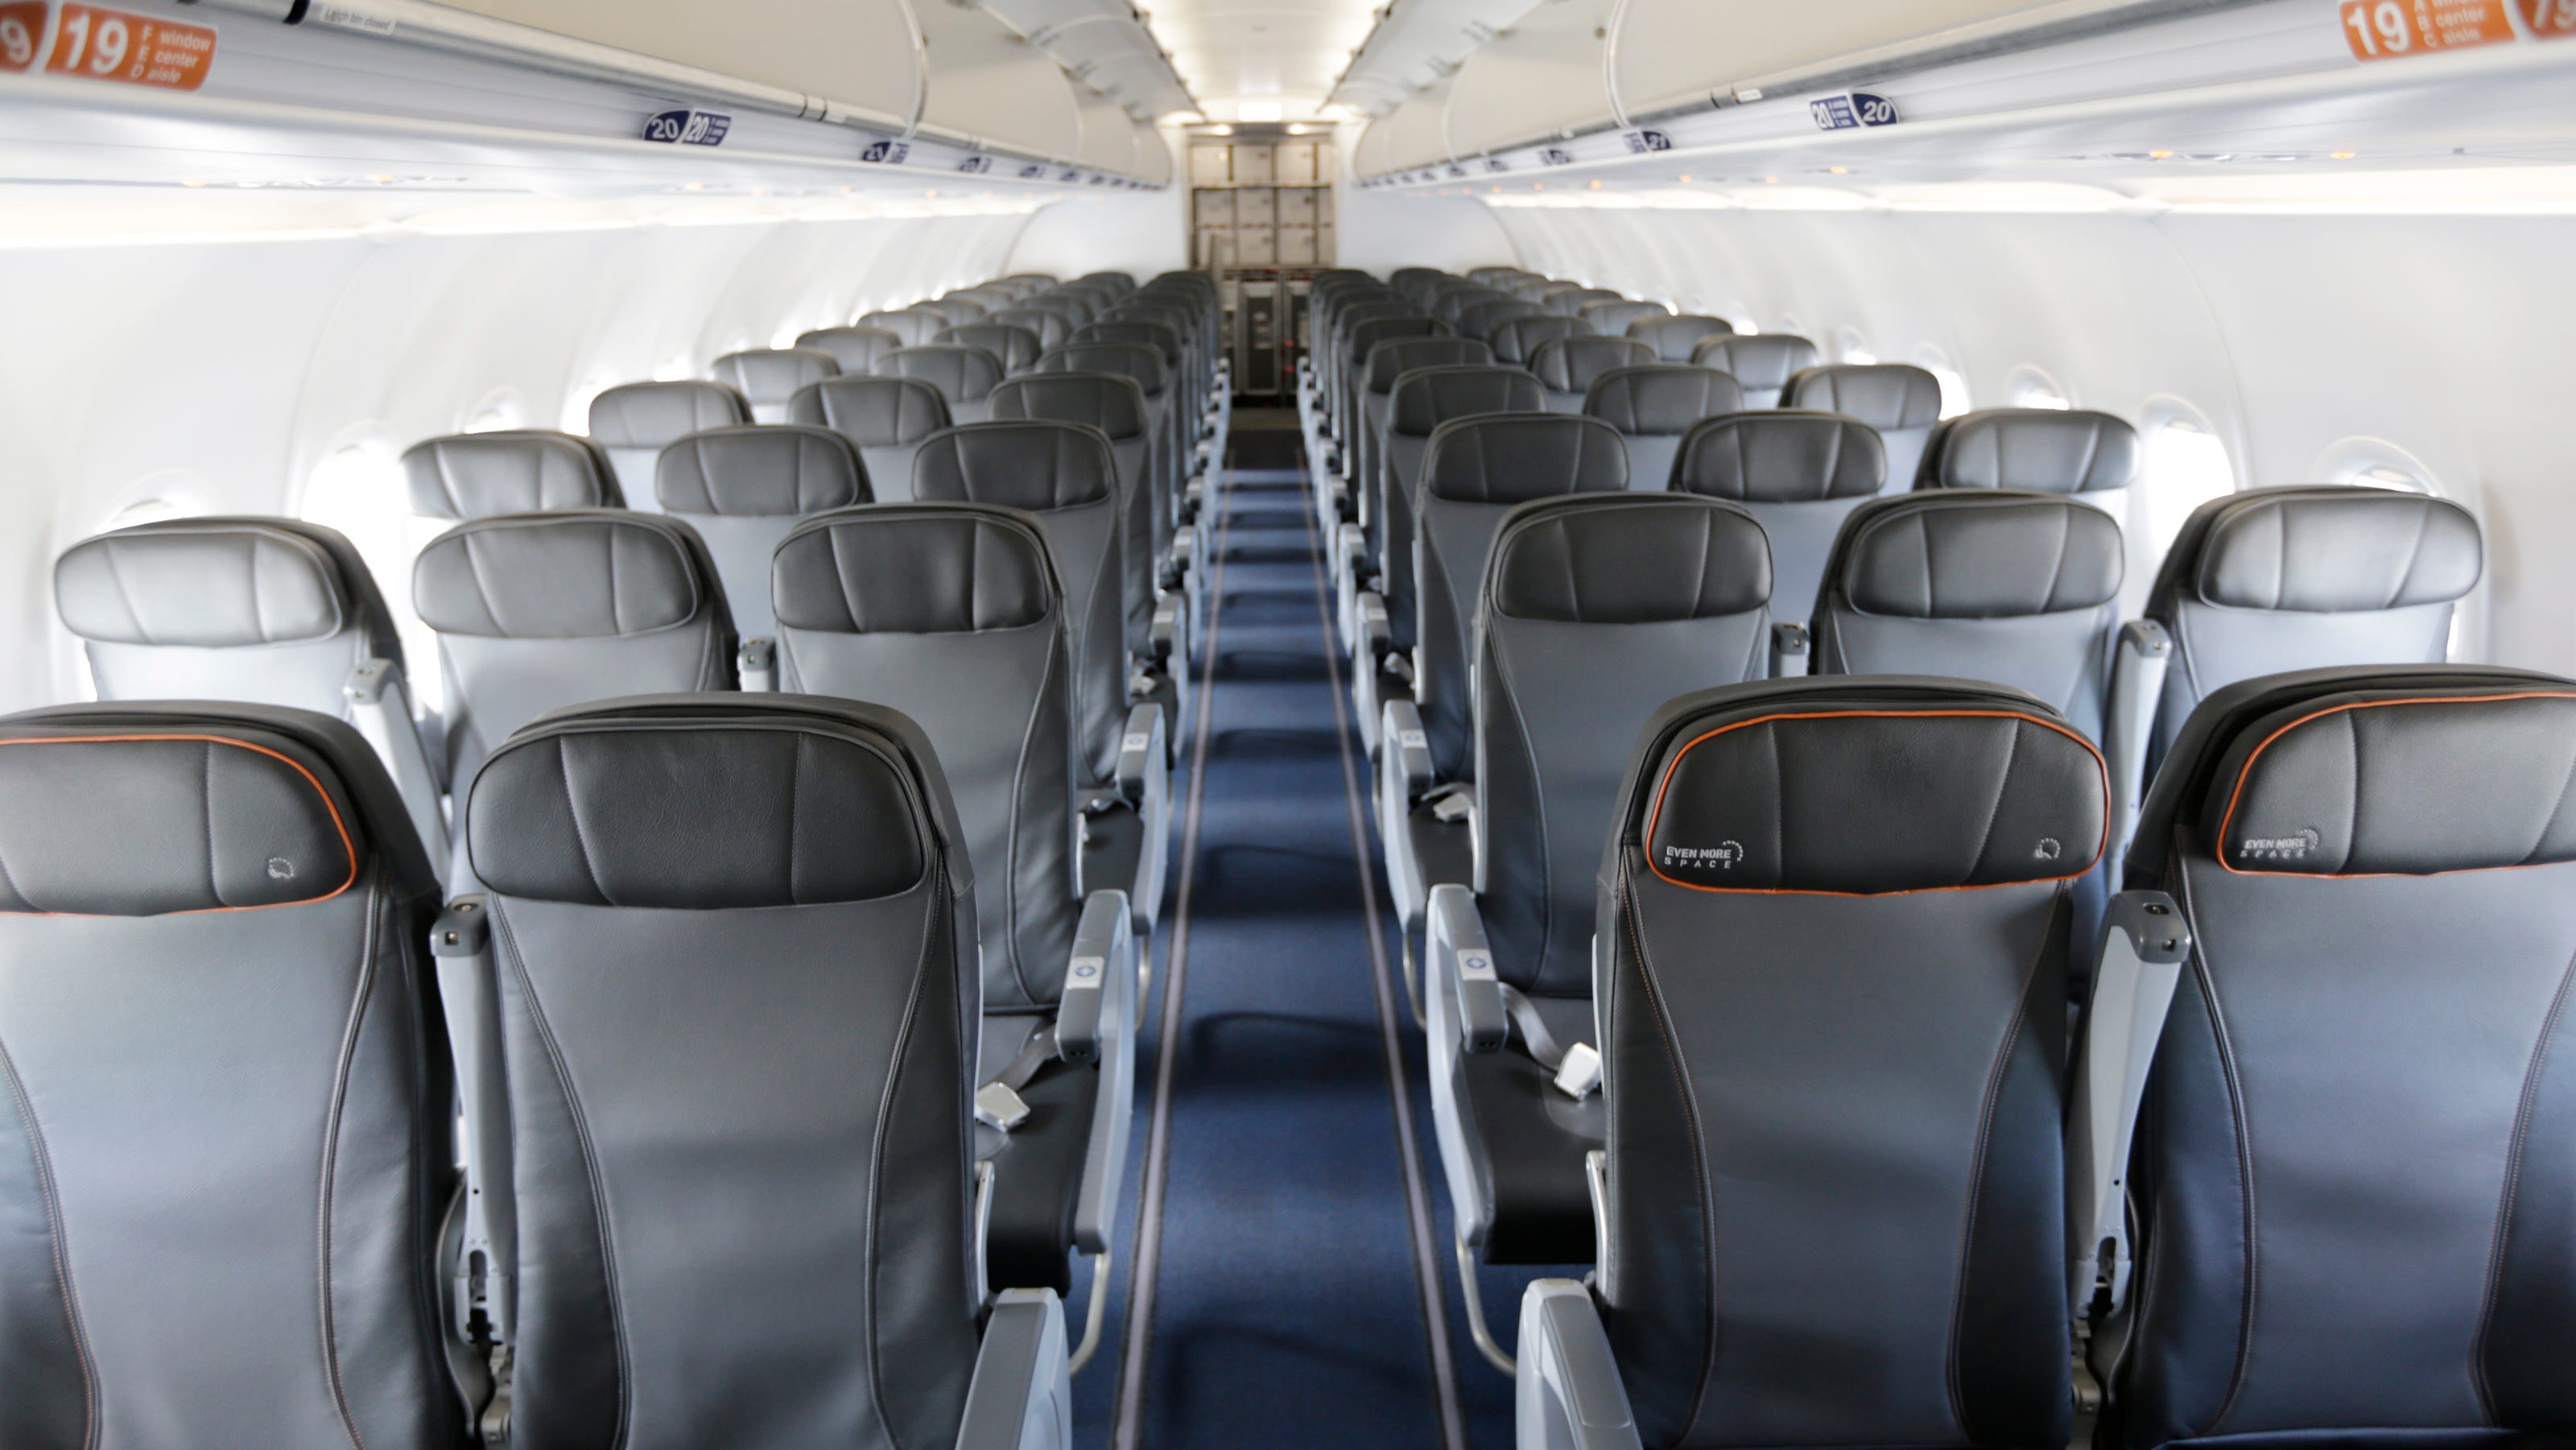 Reclining airline seat debate: It's not about 'whose fault'